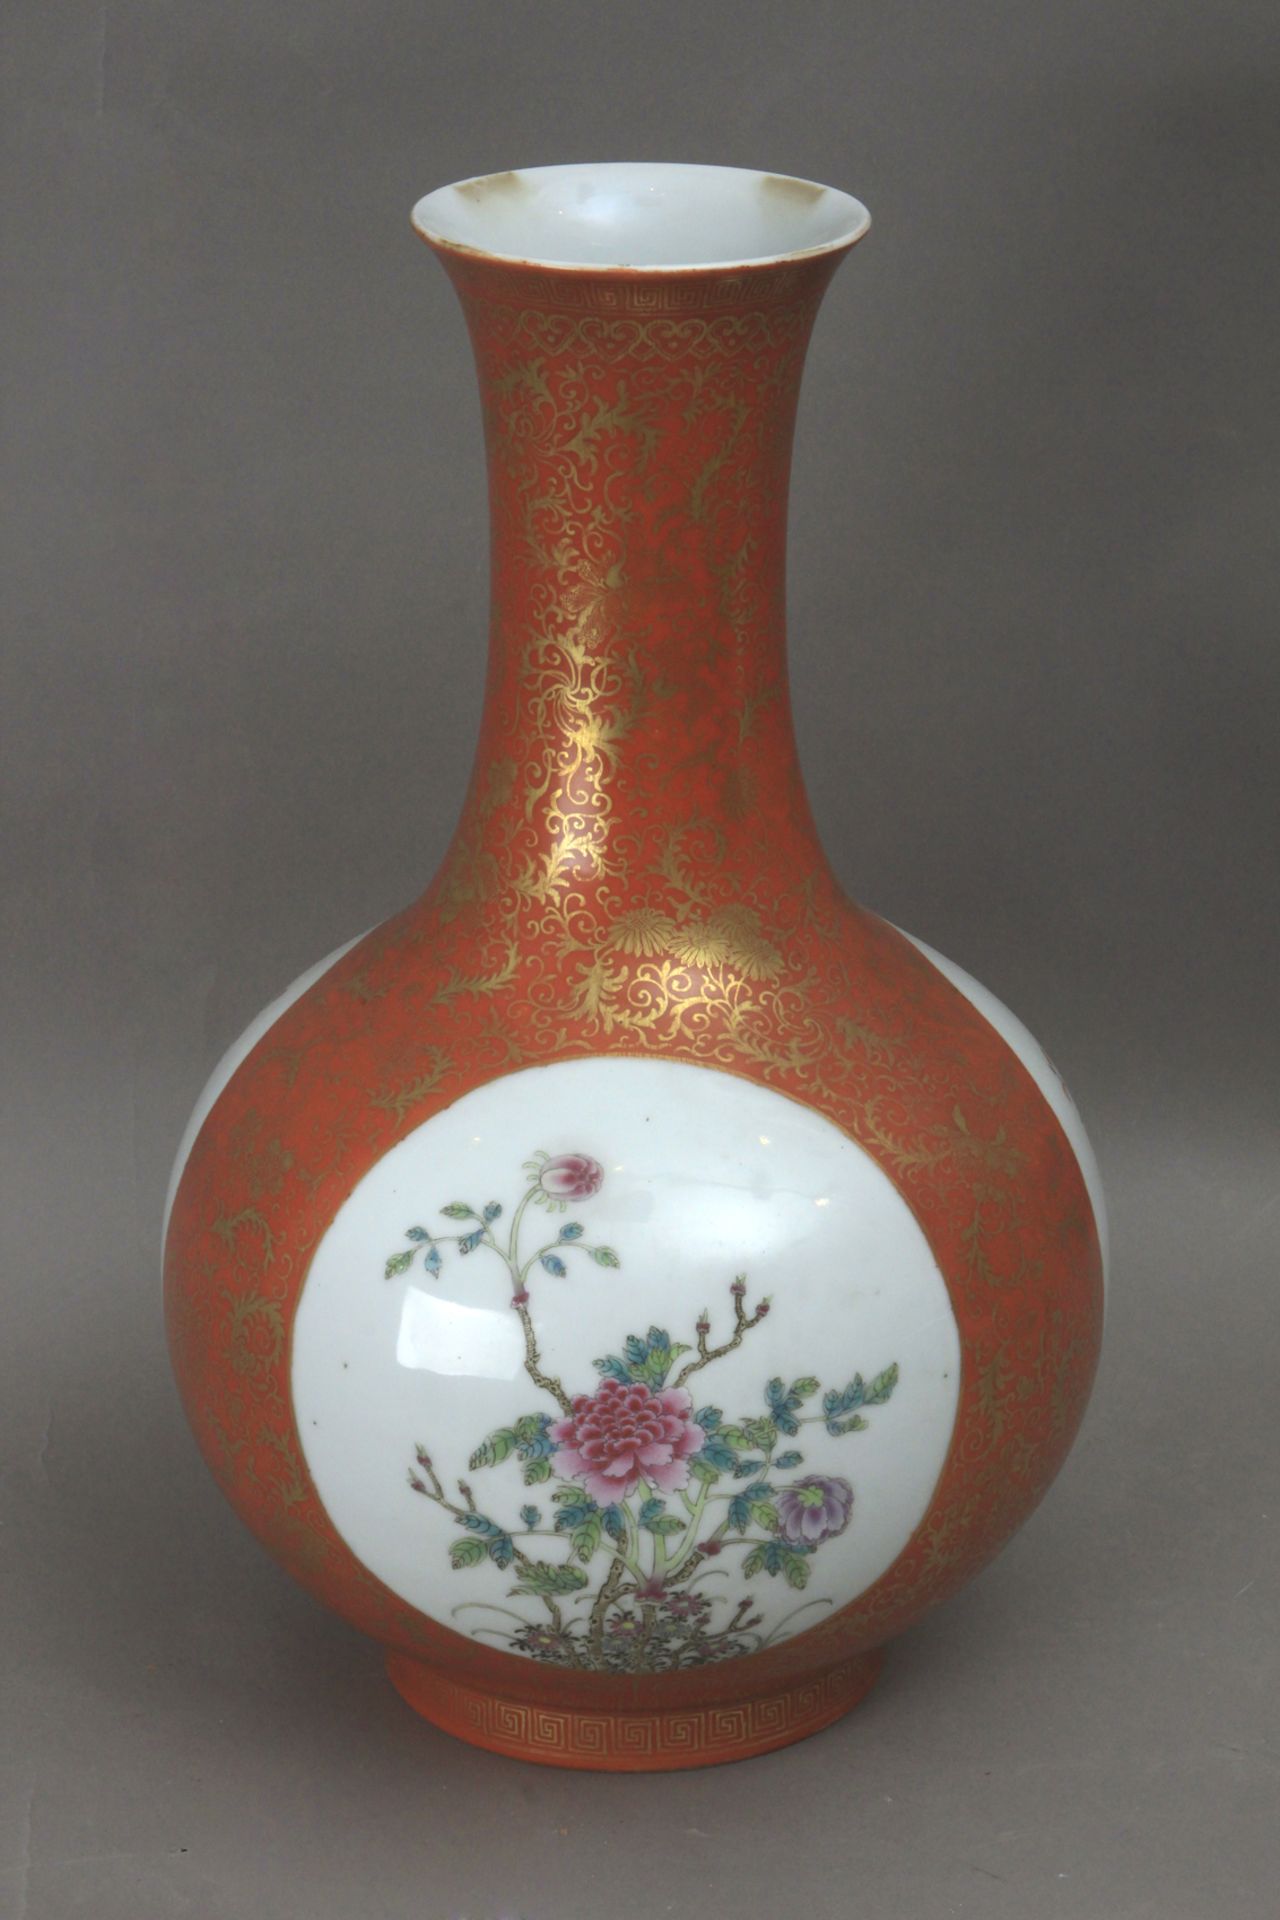 A 19th century Chinese Tianqiuping vase